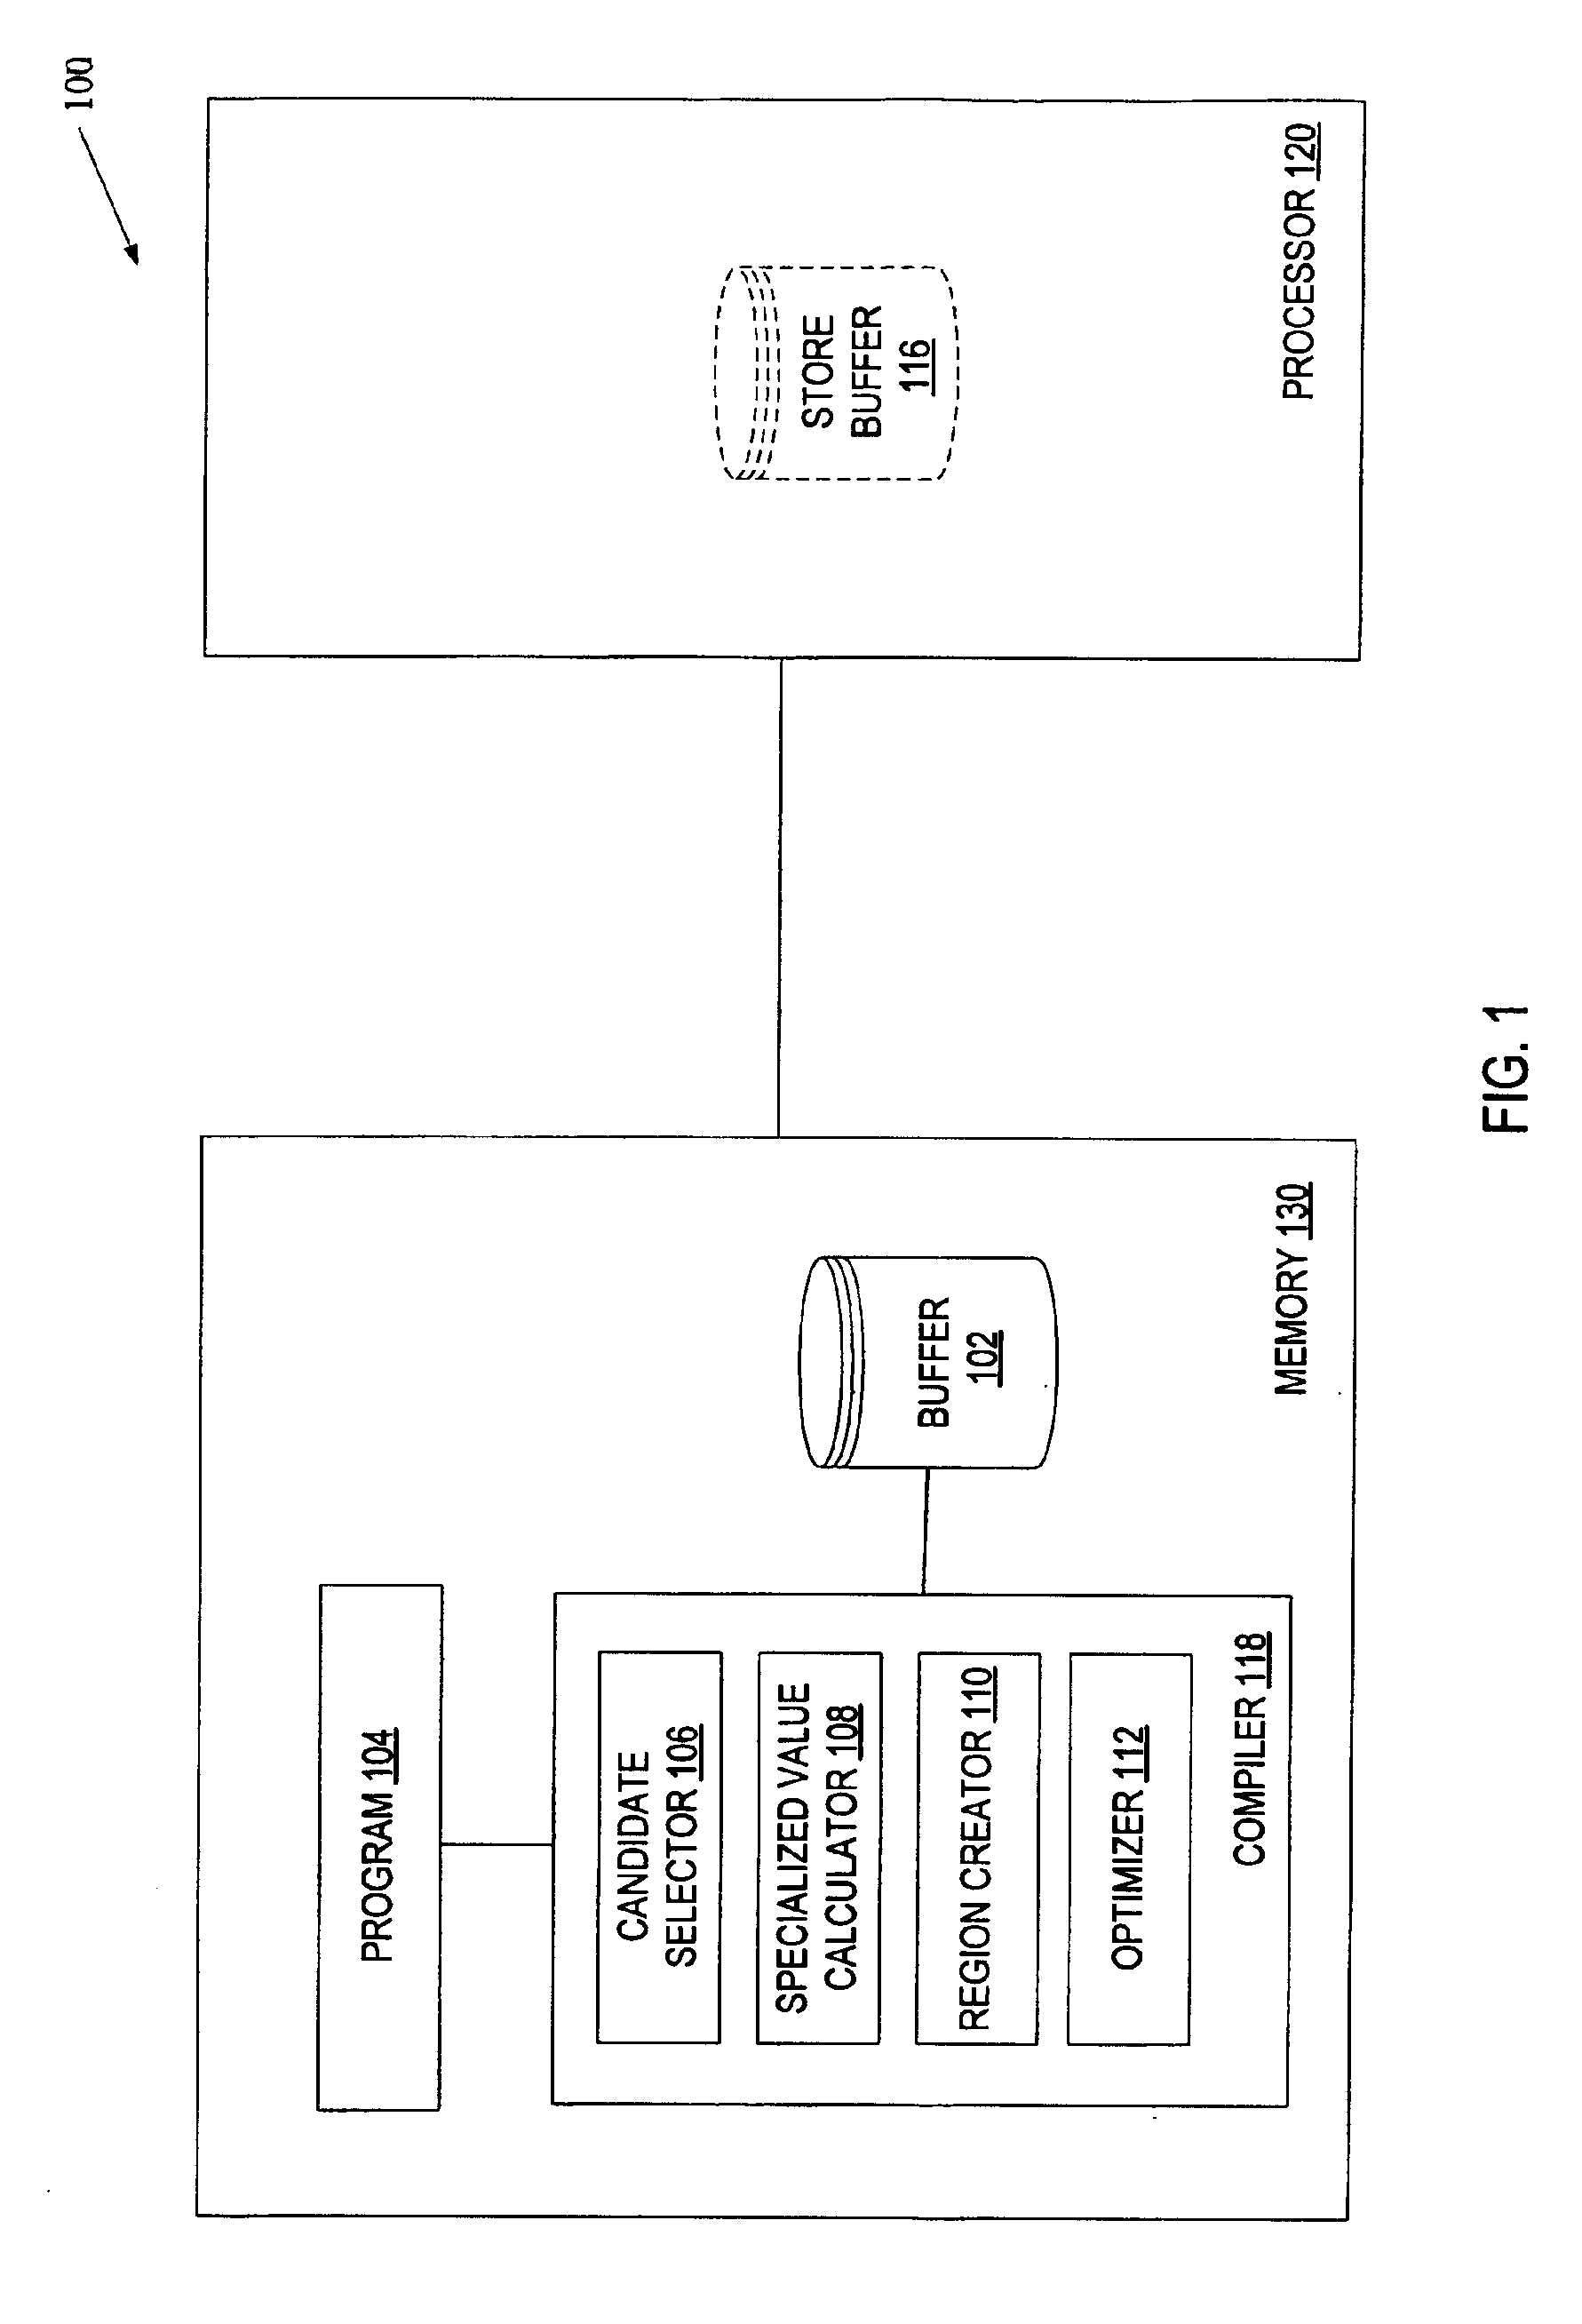 Method and apparatus for performing compiler transformation of software code using fastforward regions and value specialization